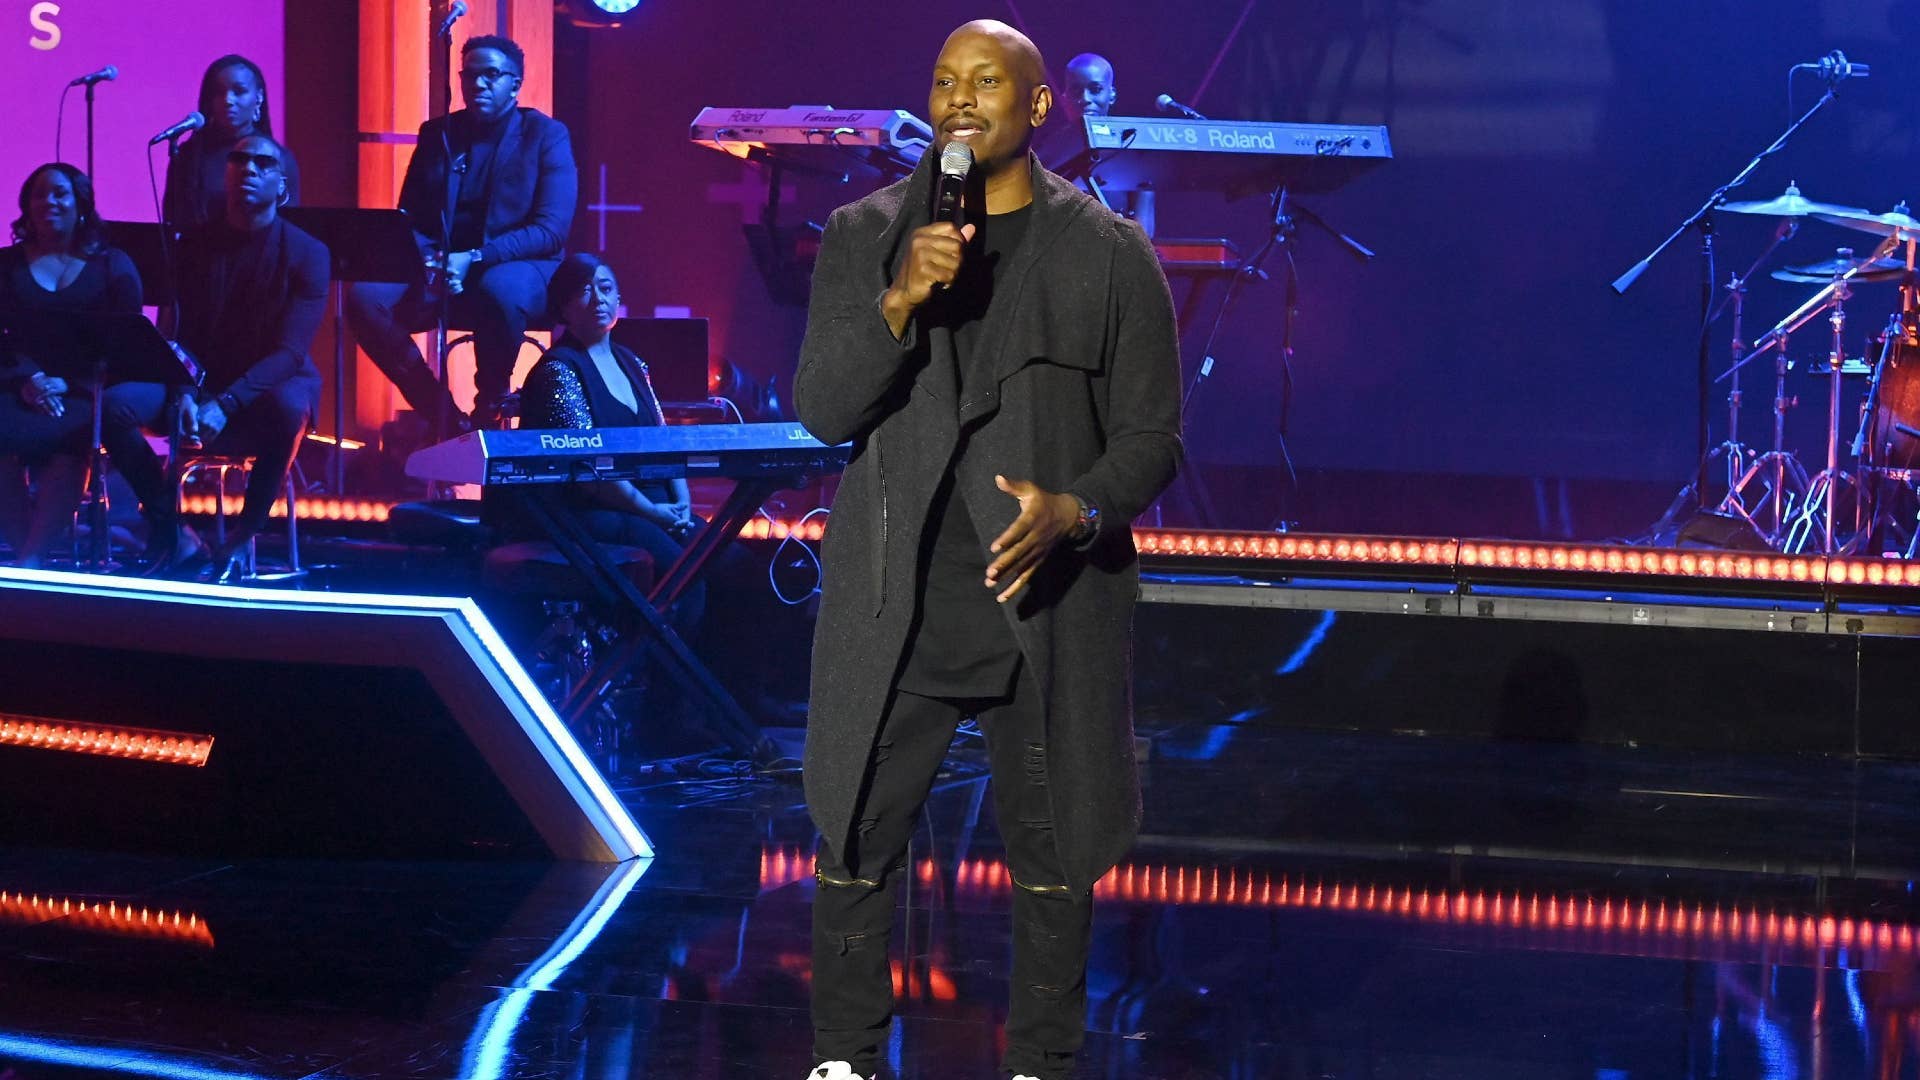 Tyrese Gibson is pictured with a microphone